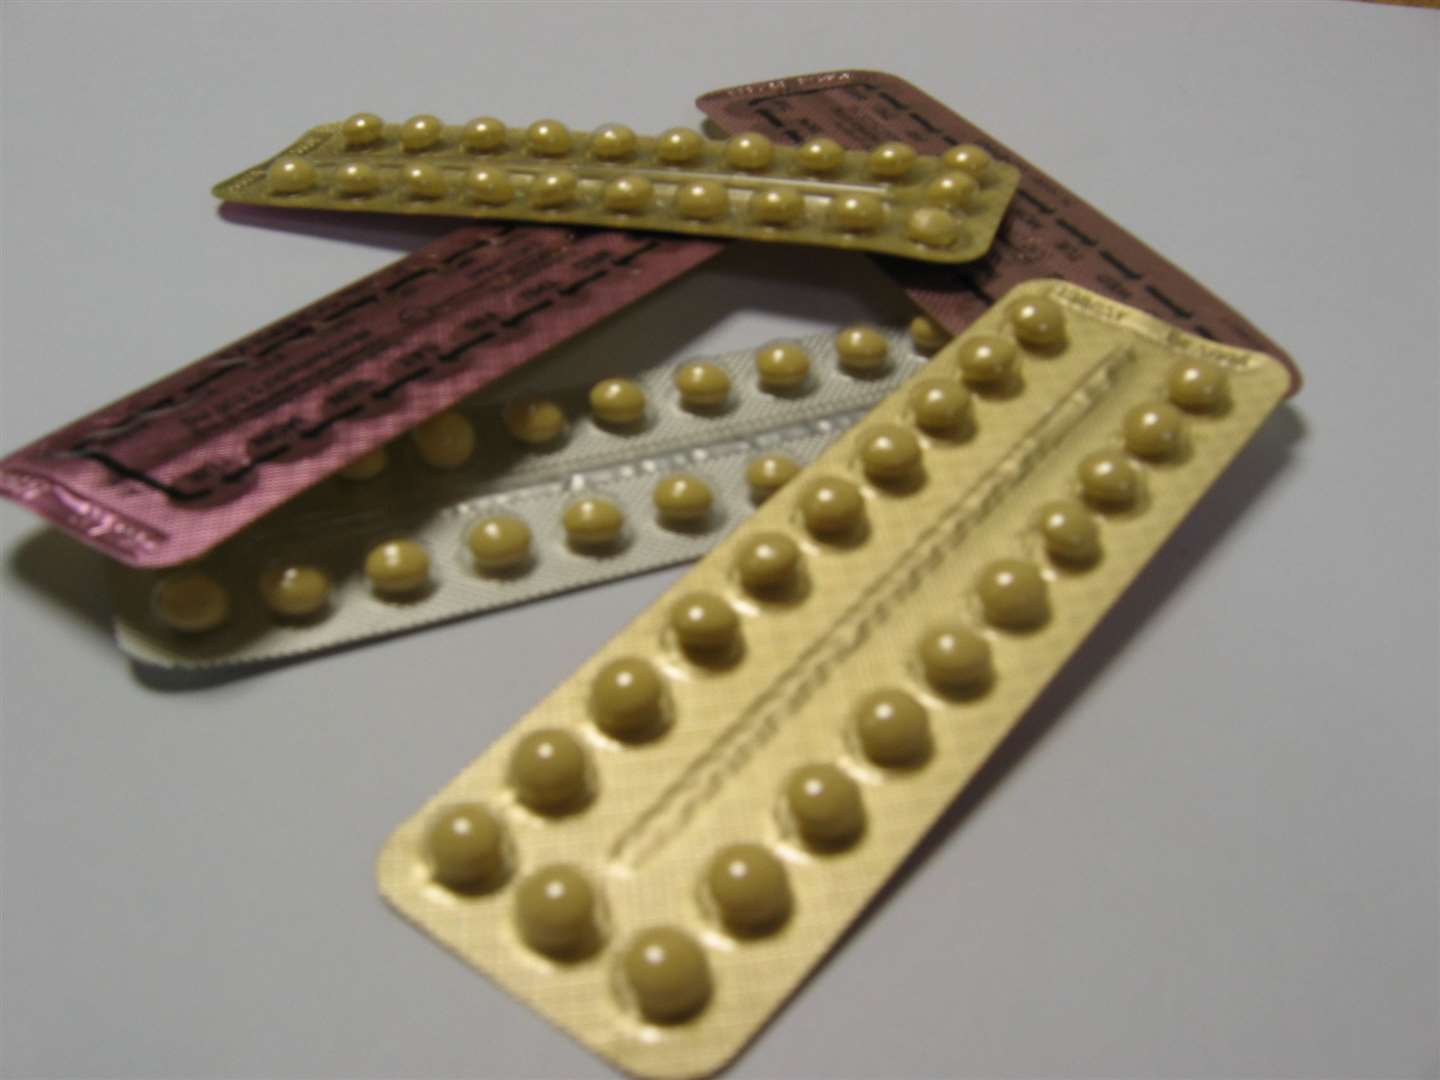 Many women with PCOS are prescribed contraceptive pills to help with their symptoms. Stock image: Helen Cockersole